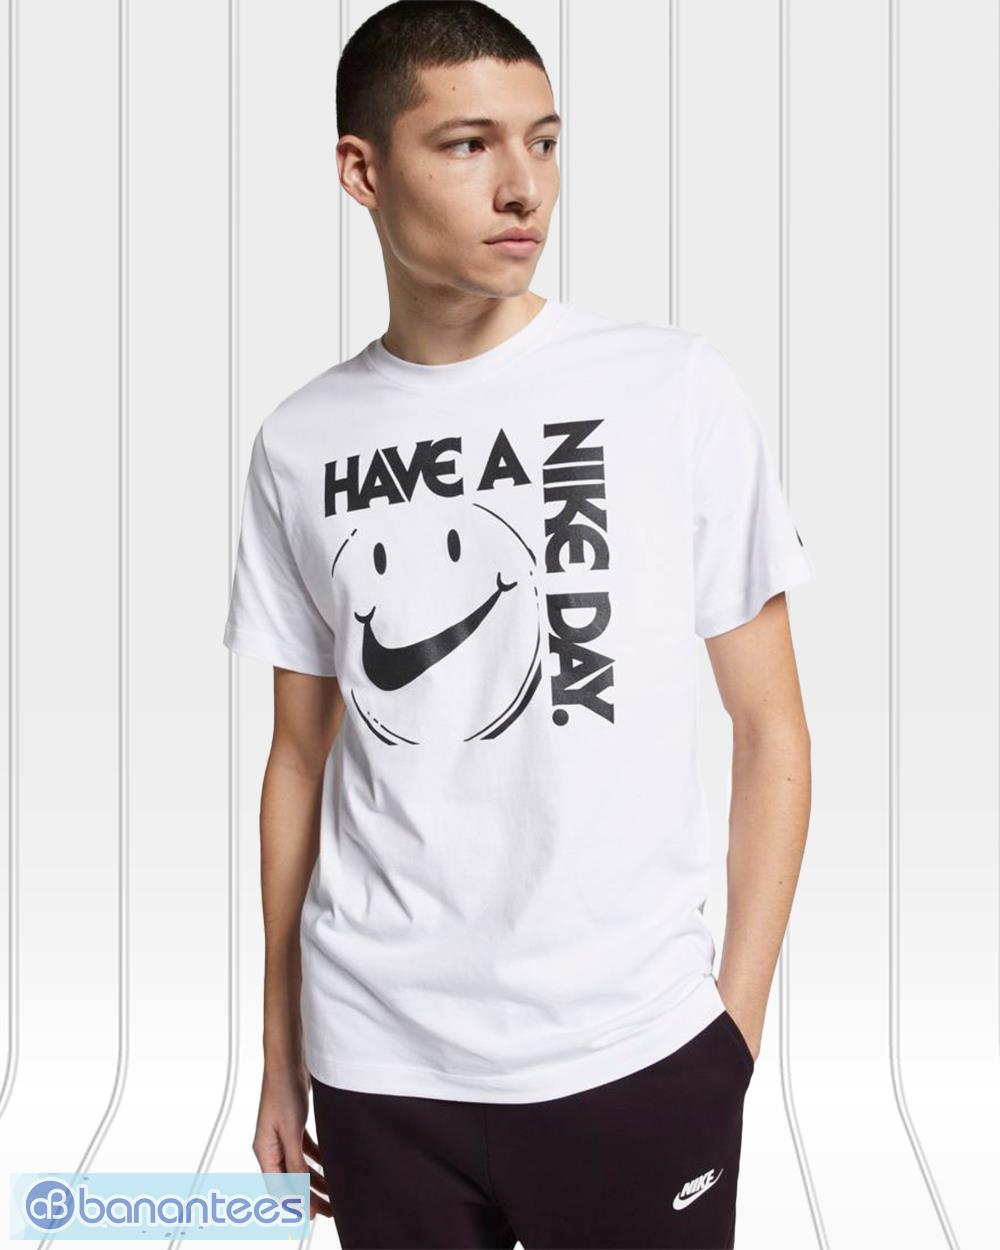 Oversætte Gammeldags fange Have a nike day funny smile T shirts - Banantees